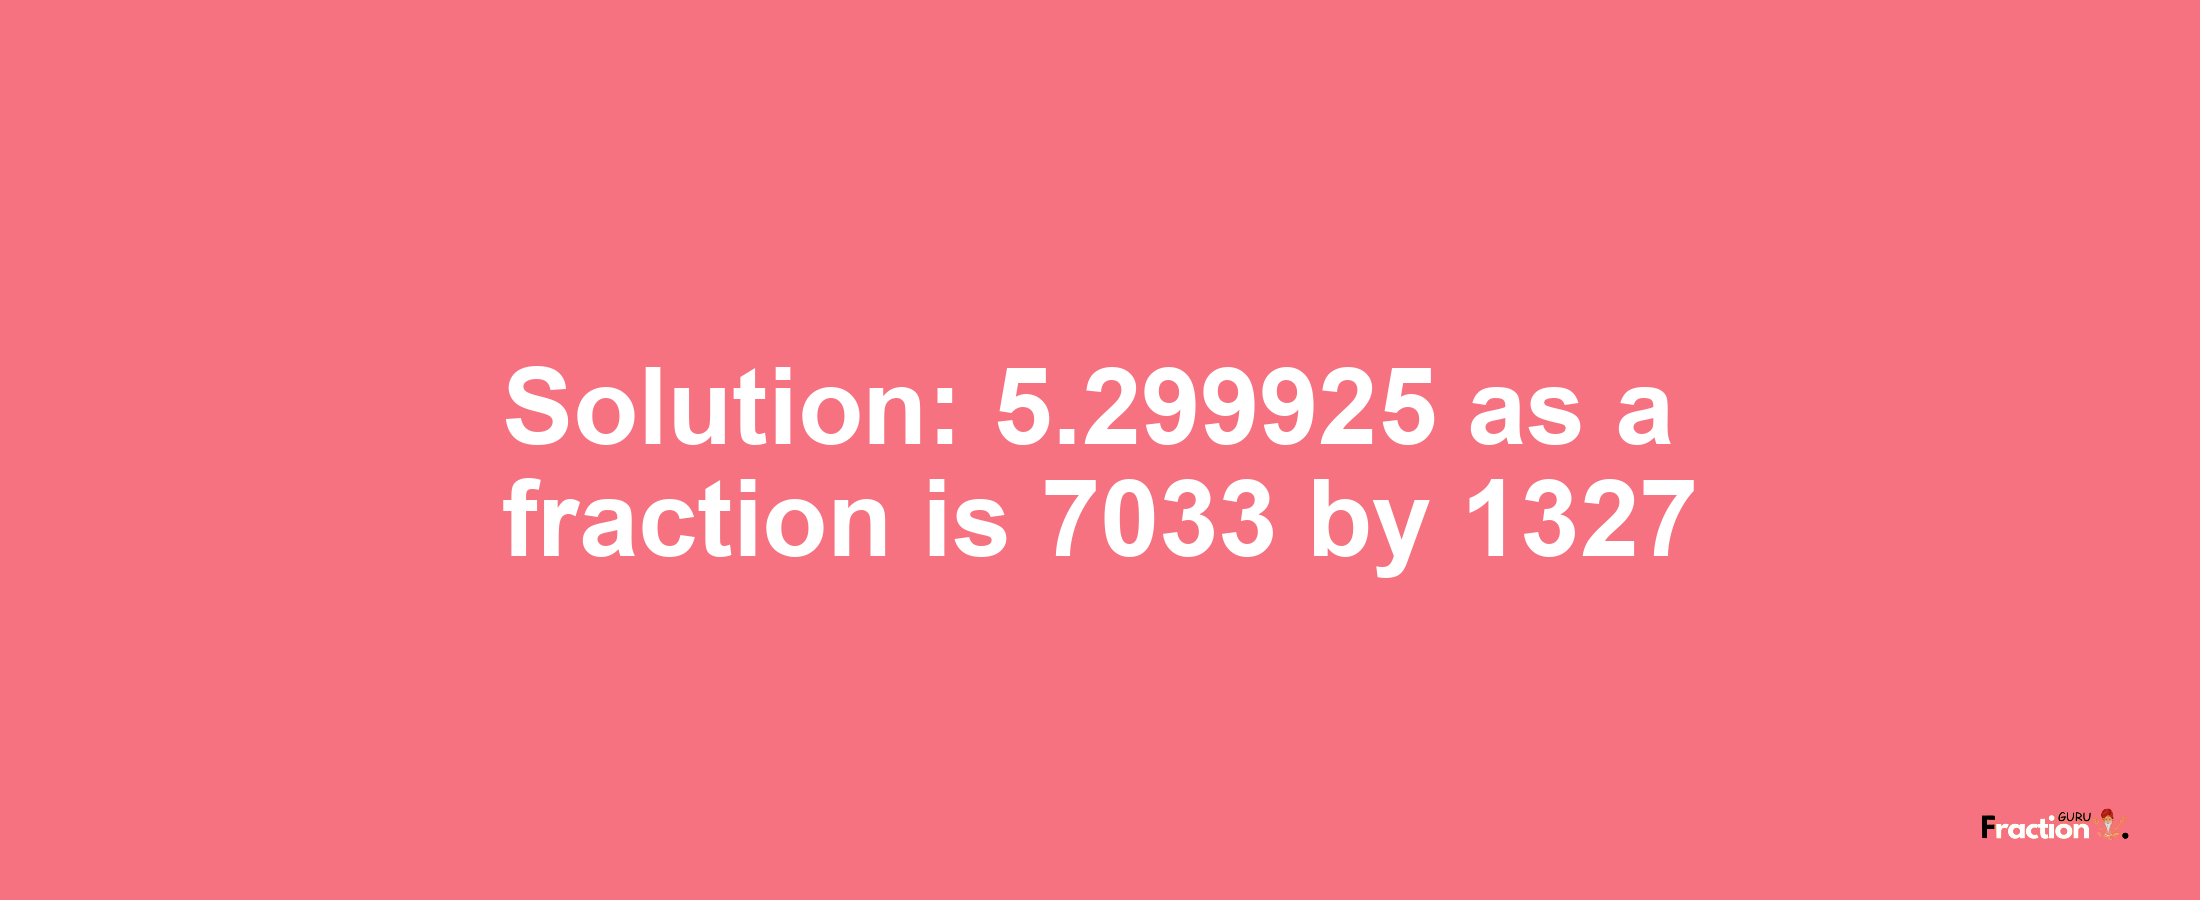 Solution:5.299925 as a fraction is 7033/1327